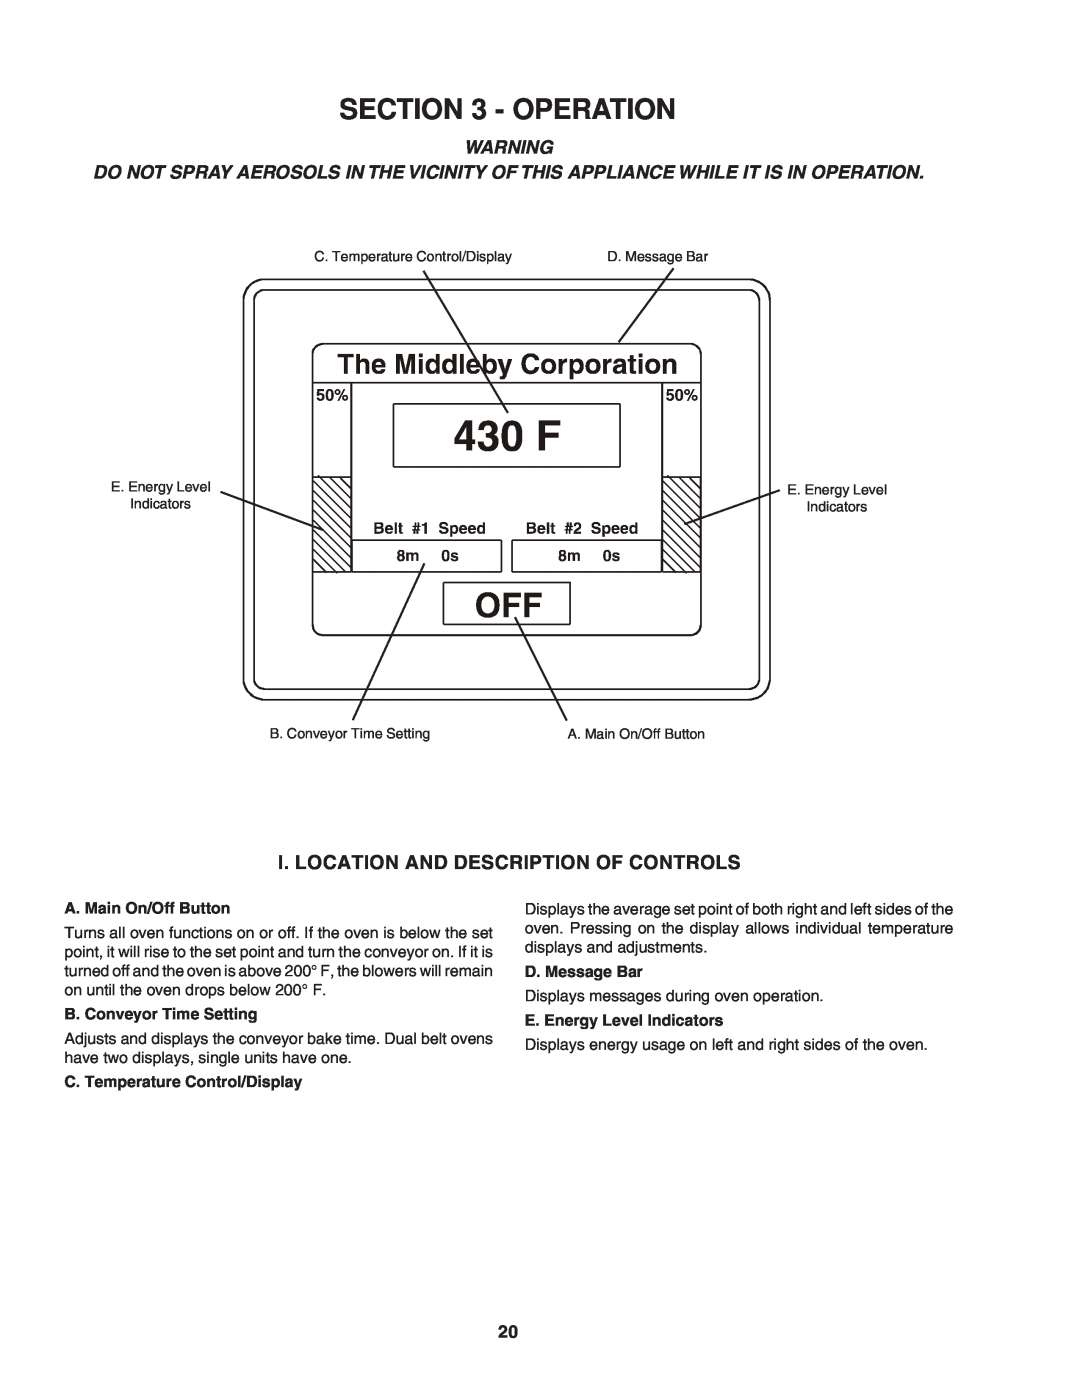 Middleby Marshall PS640 installation manual Operation, I. Location And Description Of Controls 